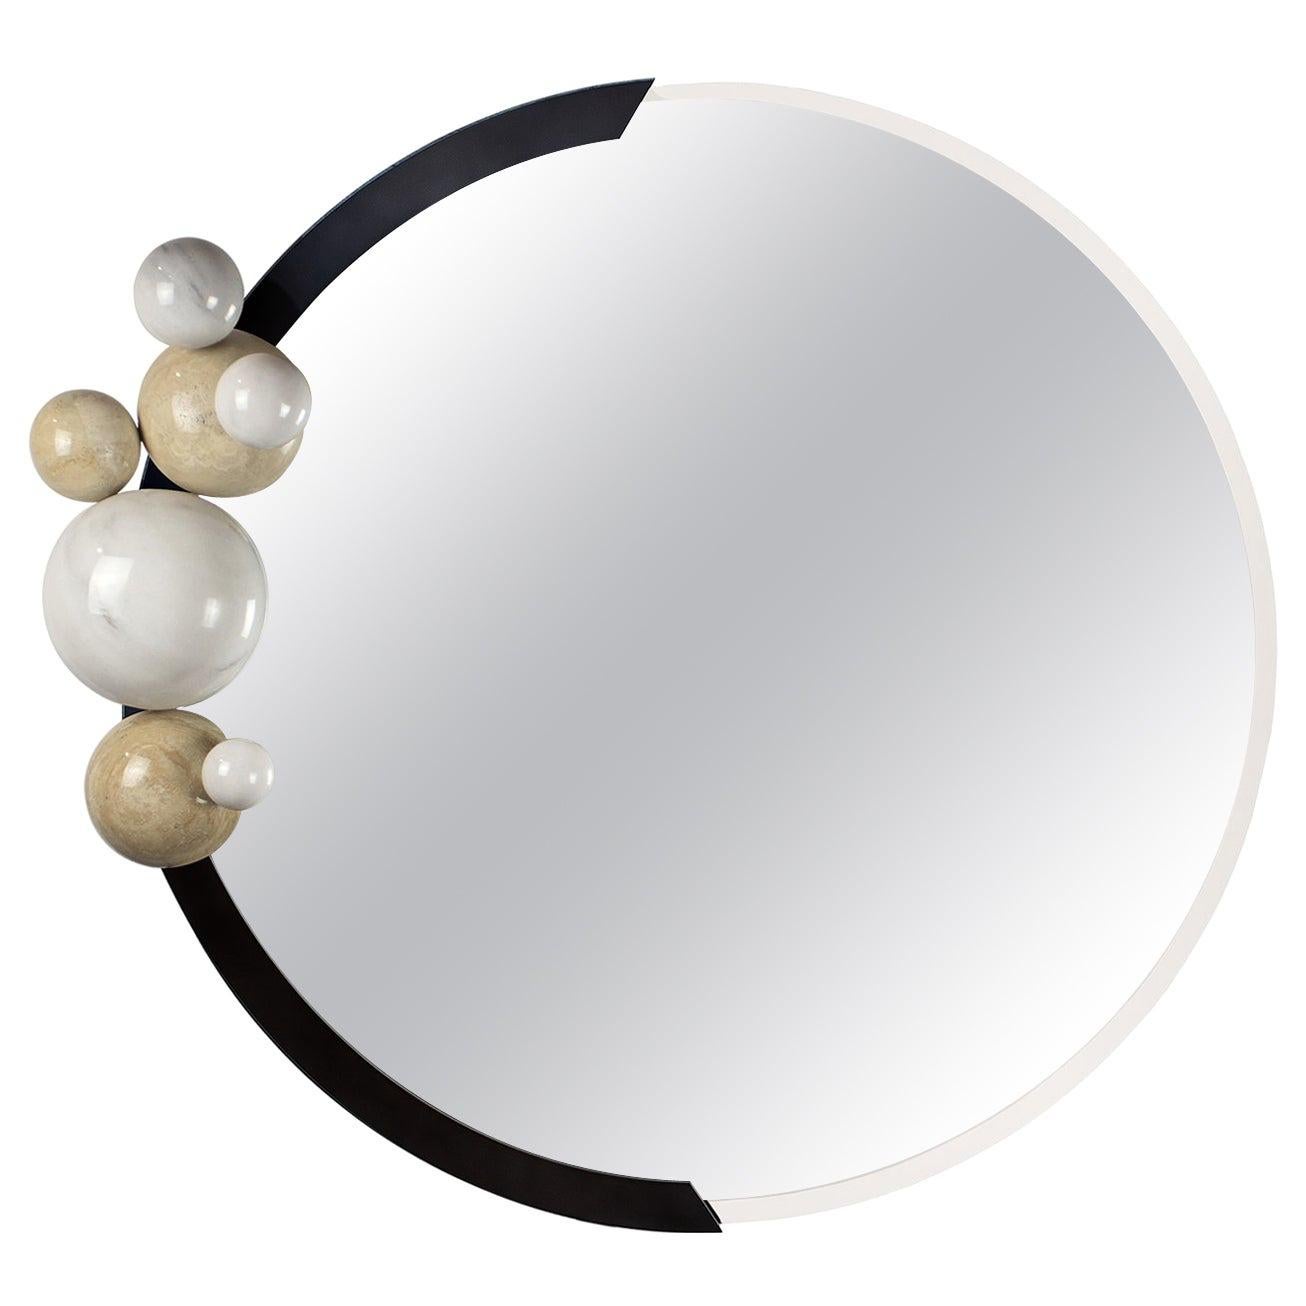 21th Century Modern Wall Mirror White Marble Spheres With Incorporated Light